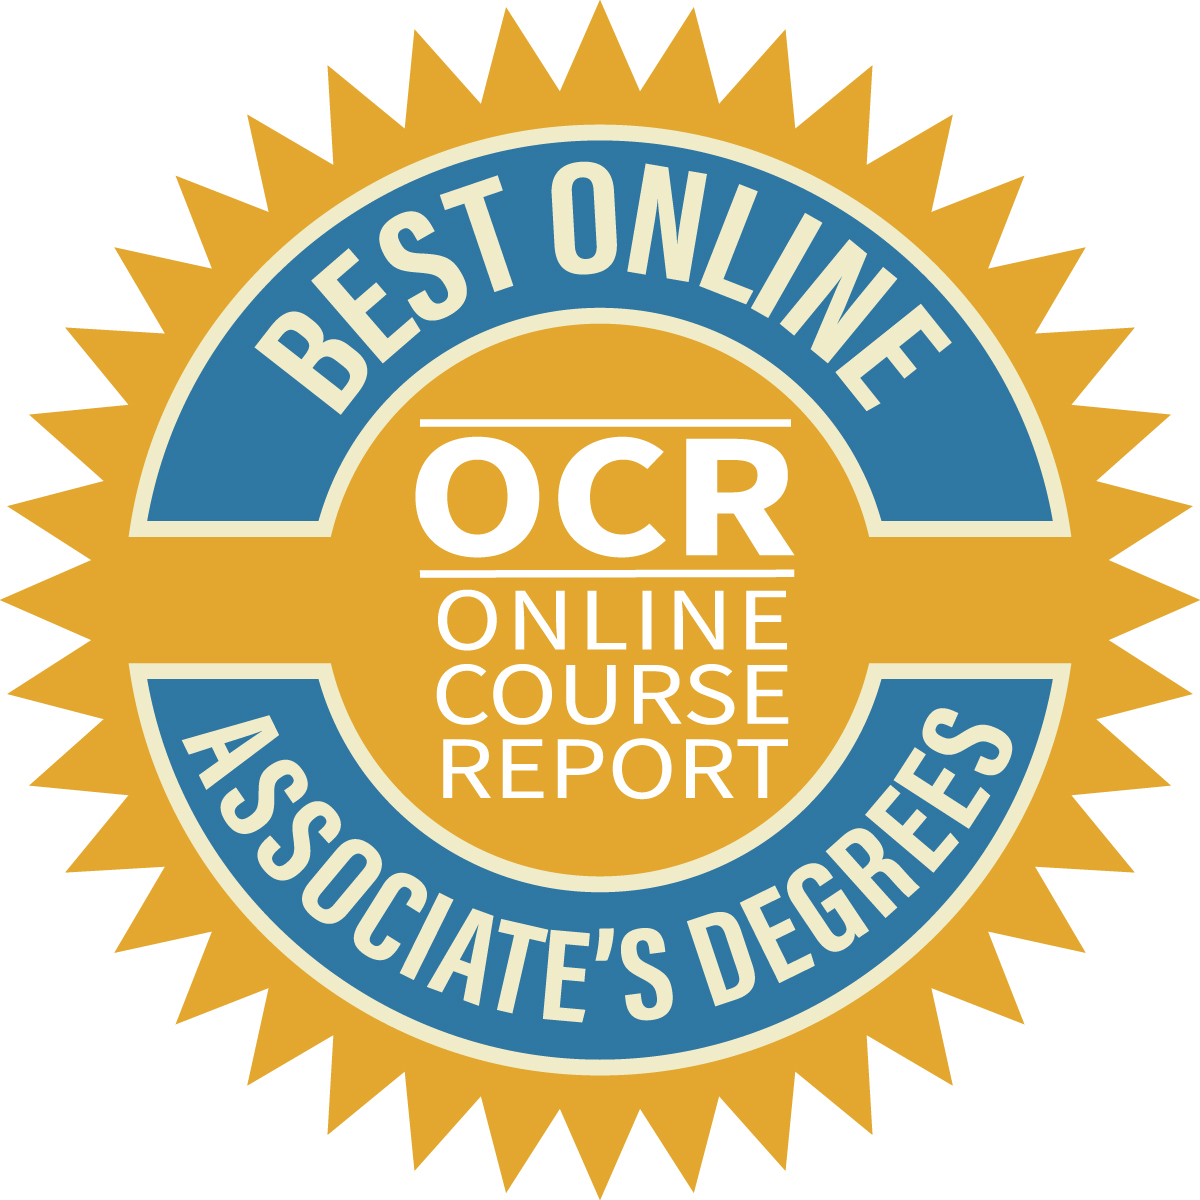 The 50 Best Online Associate's Degrees in Business Administration 2020